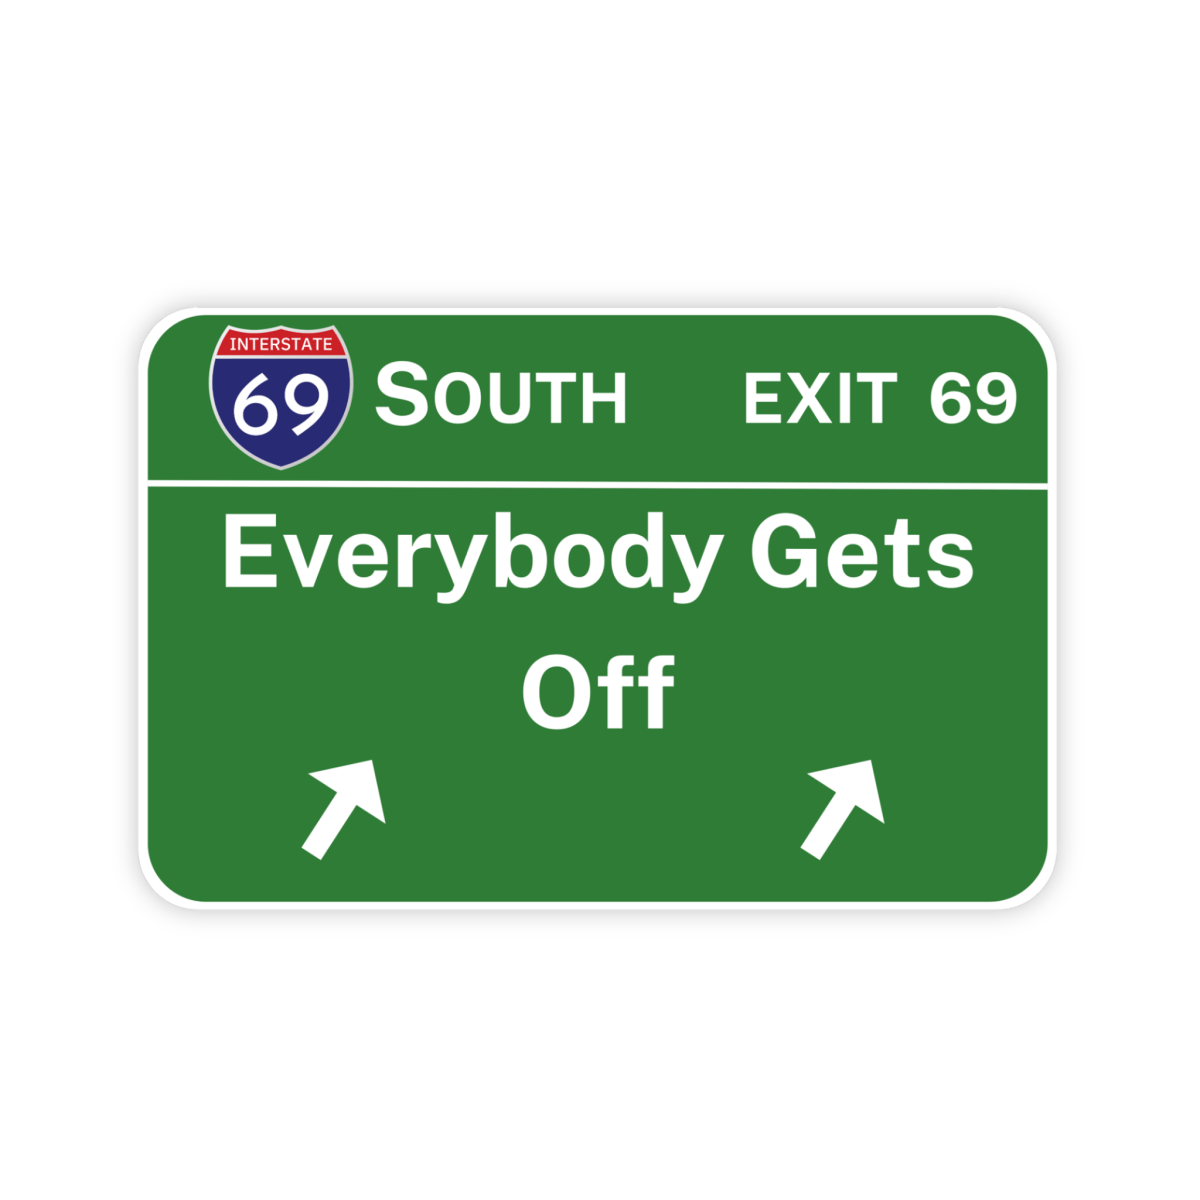 Exit 69 Everybody Gets Off Freeway Sign Sticker - stickerbullExit 69 Everybody Gets Off Freeway Sign StickerRetail StickerstickerbullstickerbullExit69_#138Exit 69 Everybody Gets Off Freeway Sign Sticker